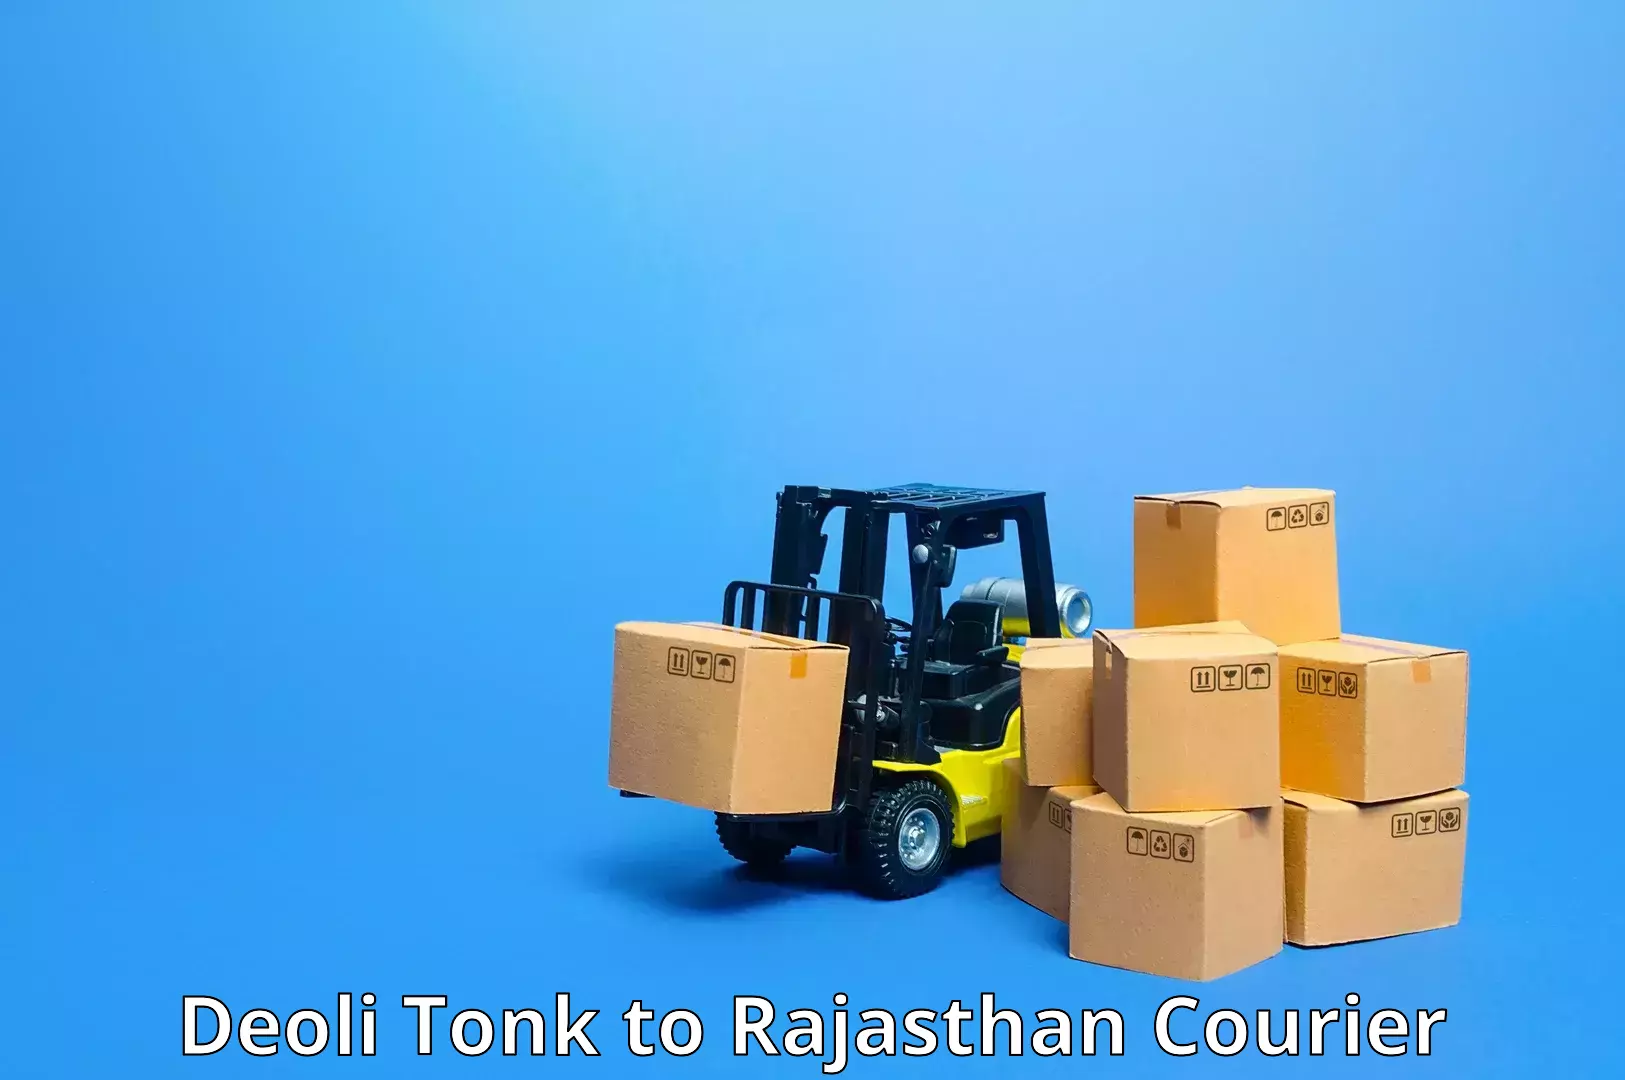 Global courier networks Deoli Tonk to Sikar